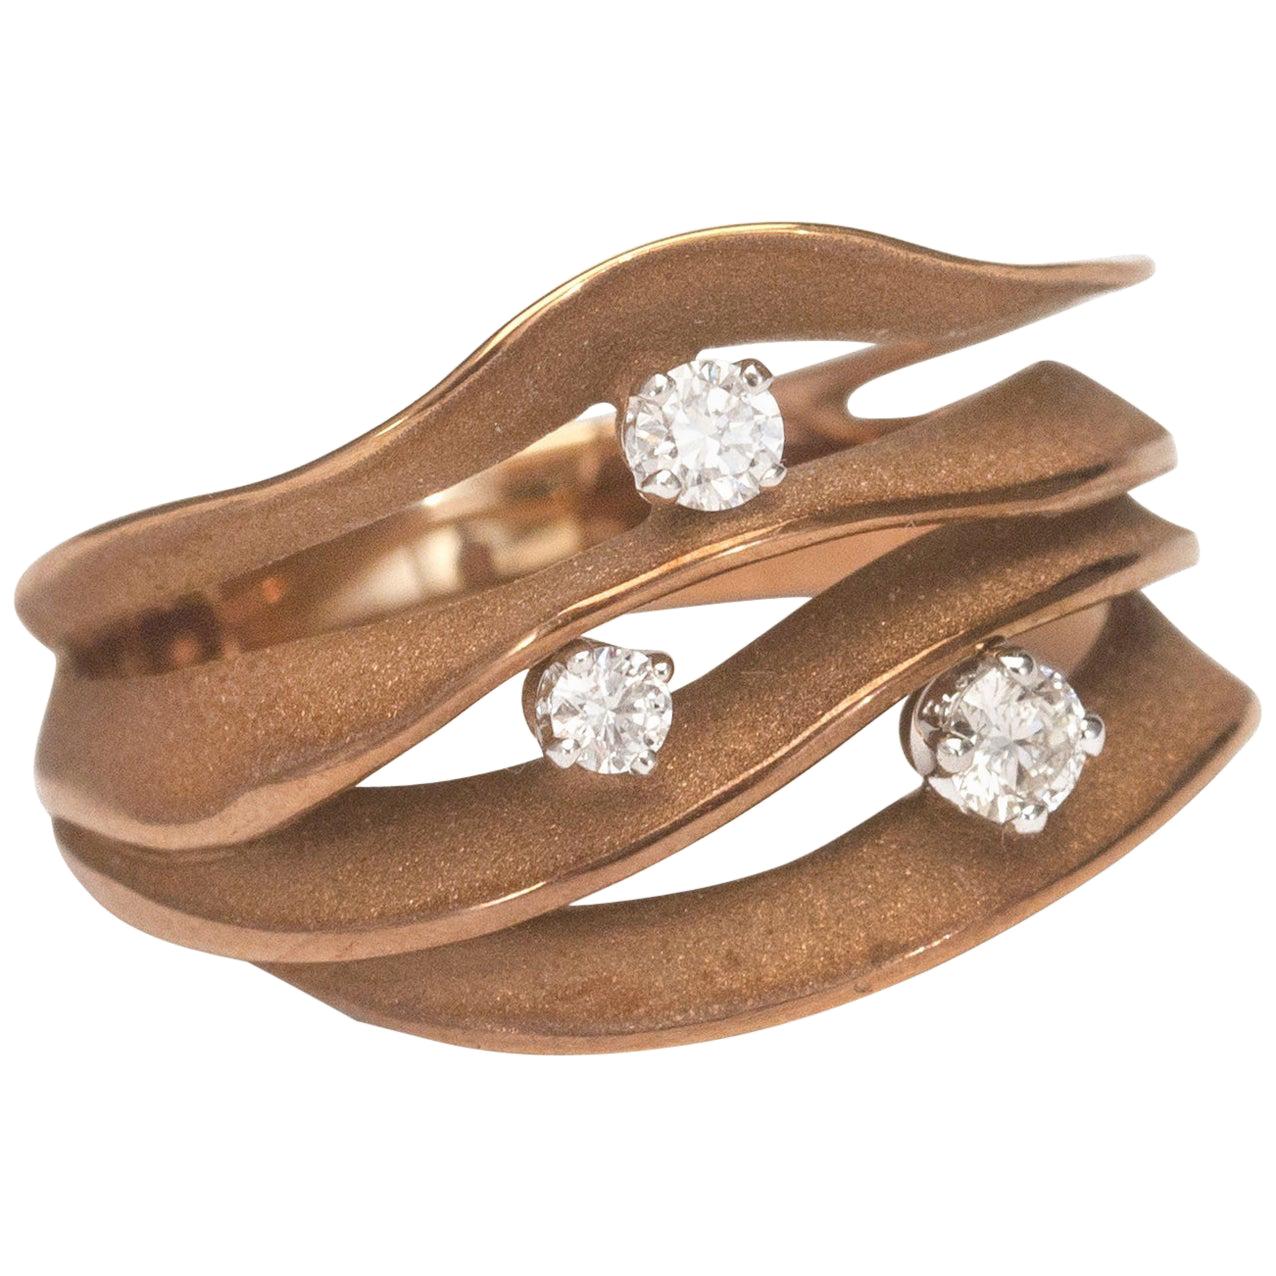 For Sale:  Annamaria Cammilli "Dune Royal" Ring with Diamonds in 18k Brown Chocolate Gold